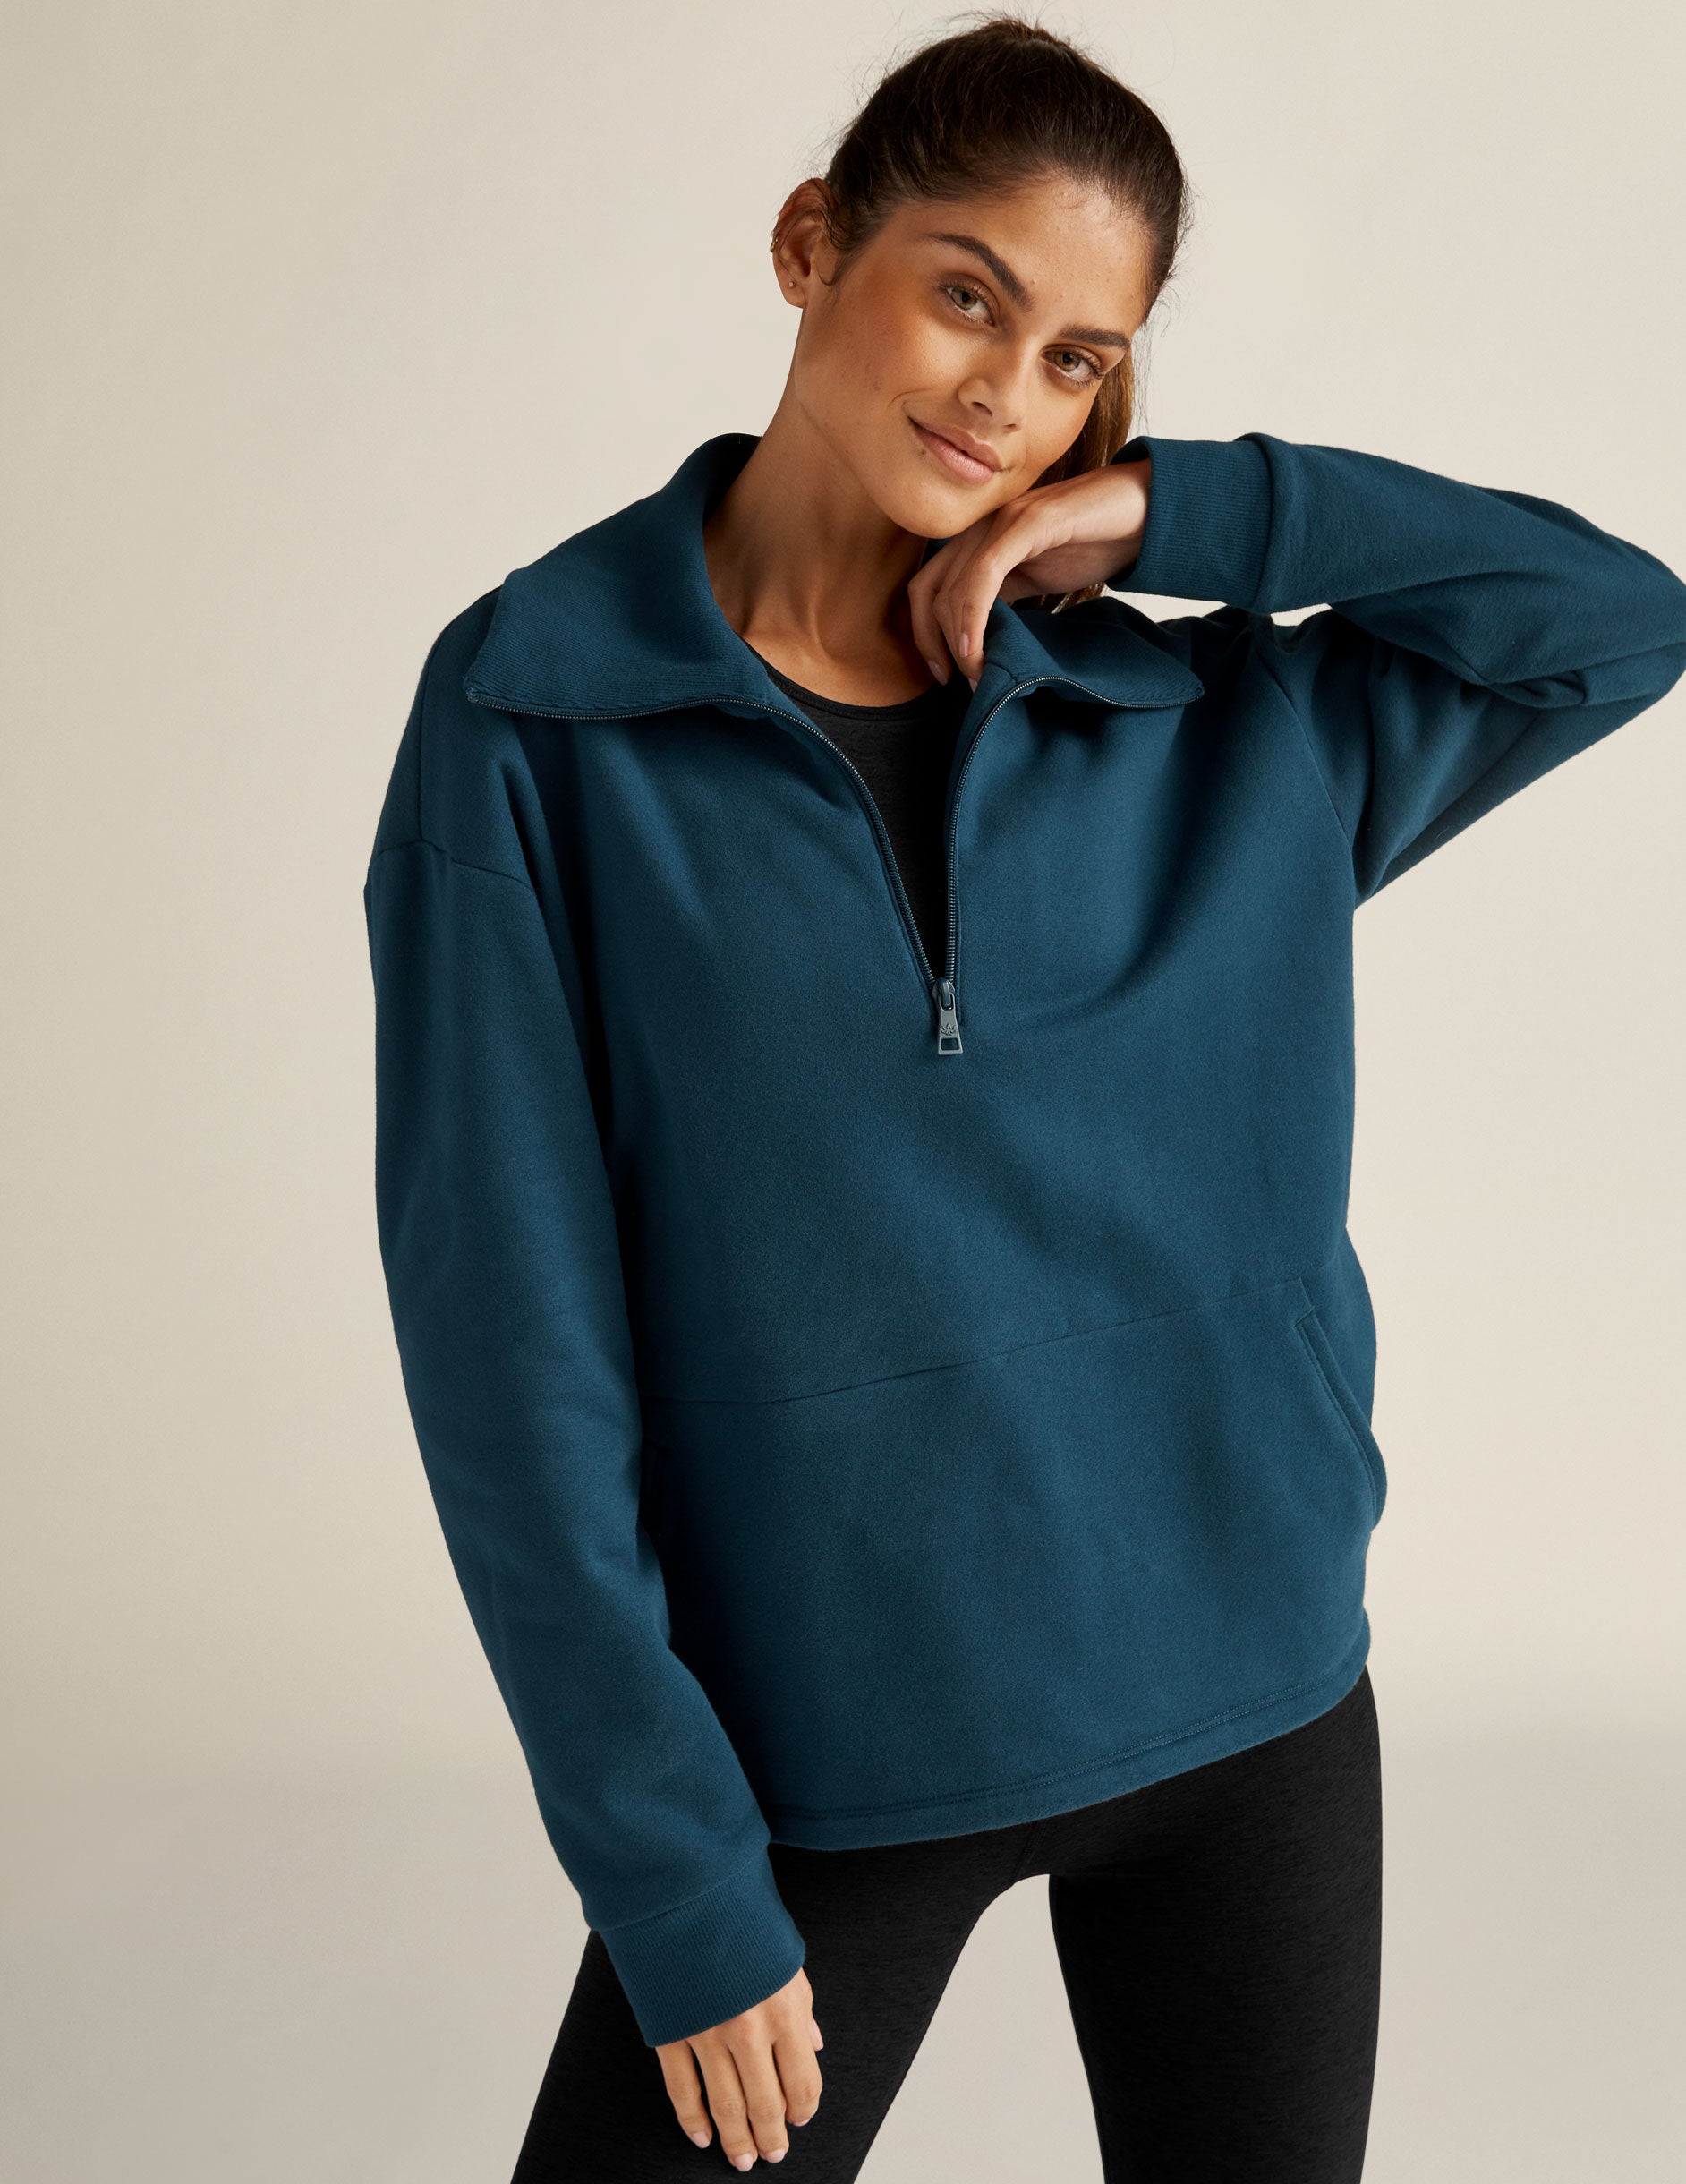 Lululemon Out Of Bounds Hoodie In Heathered Utility Blue